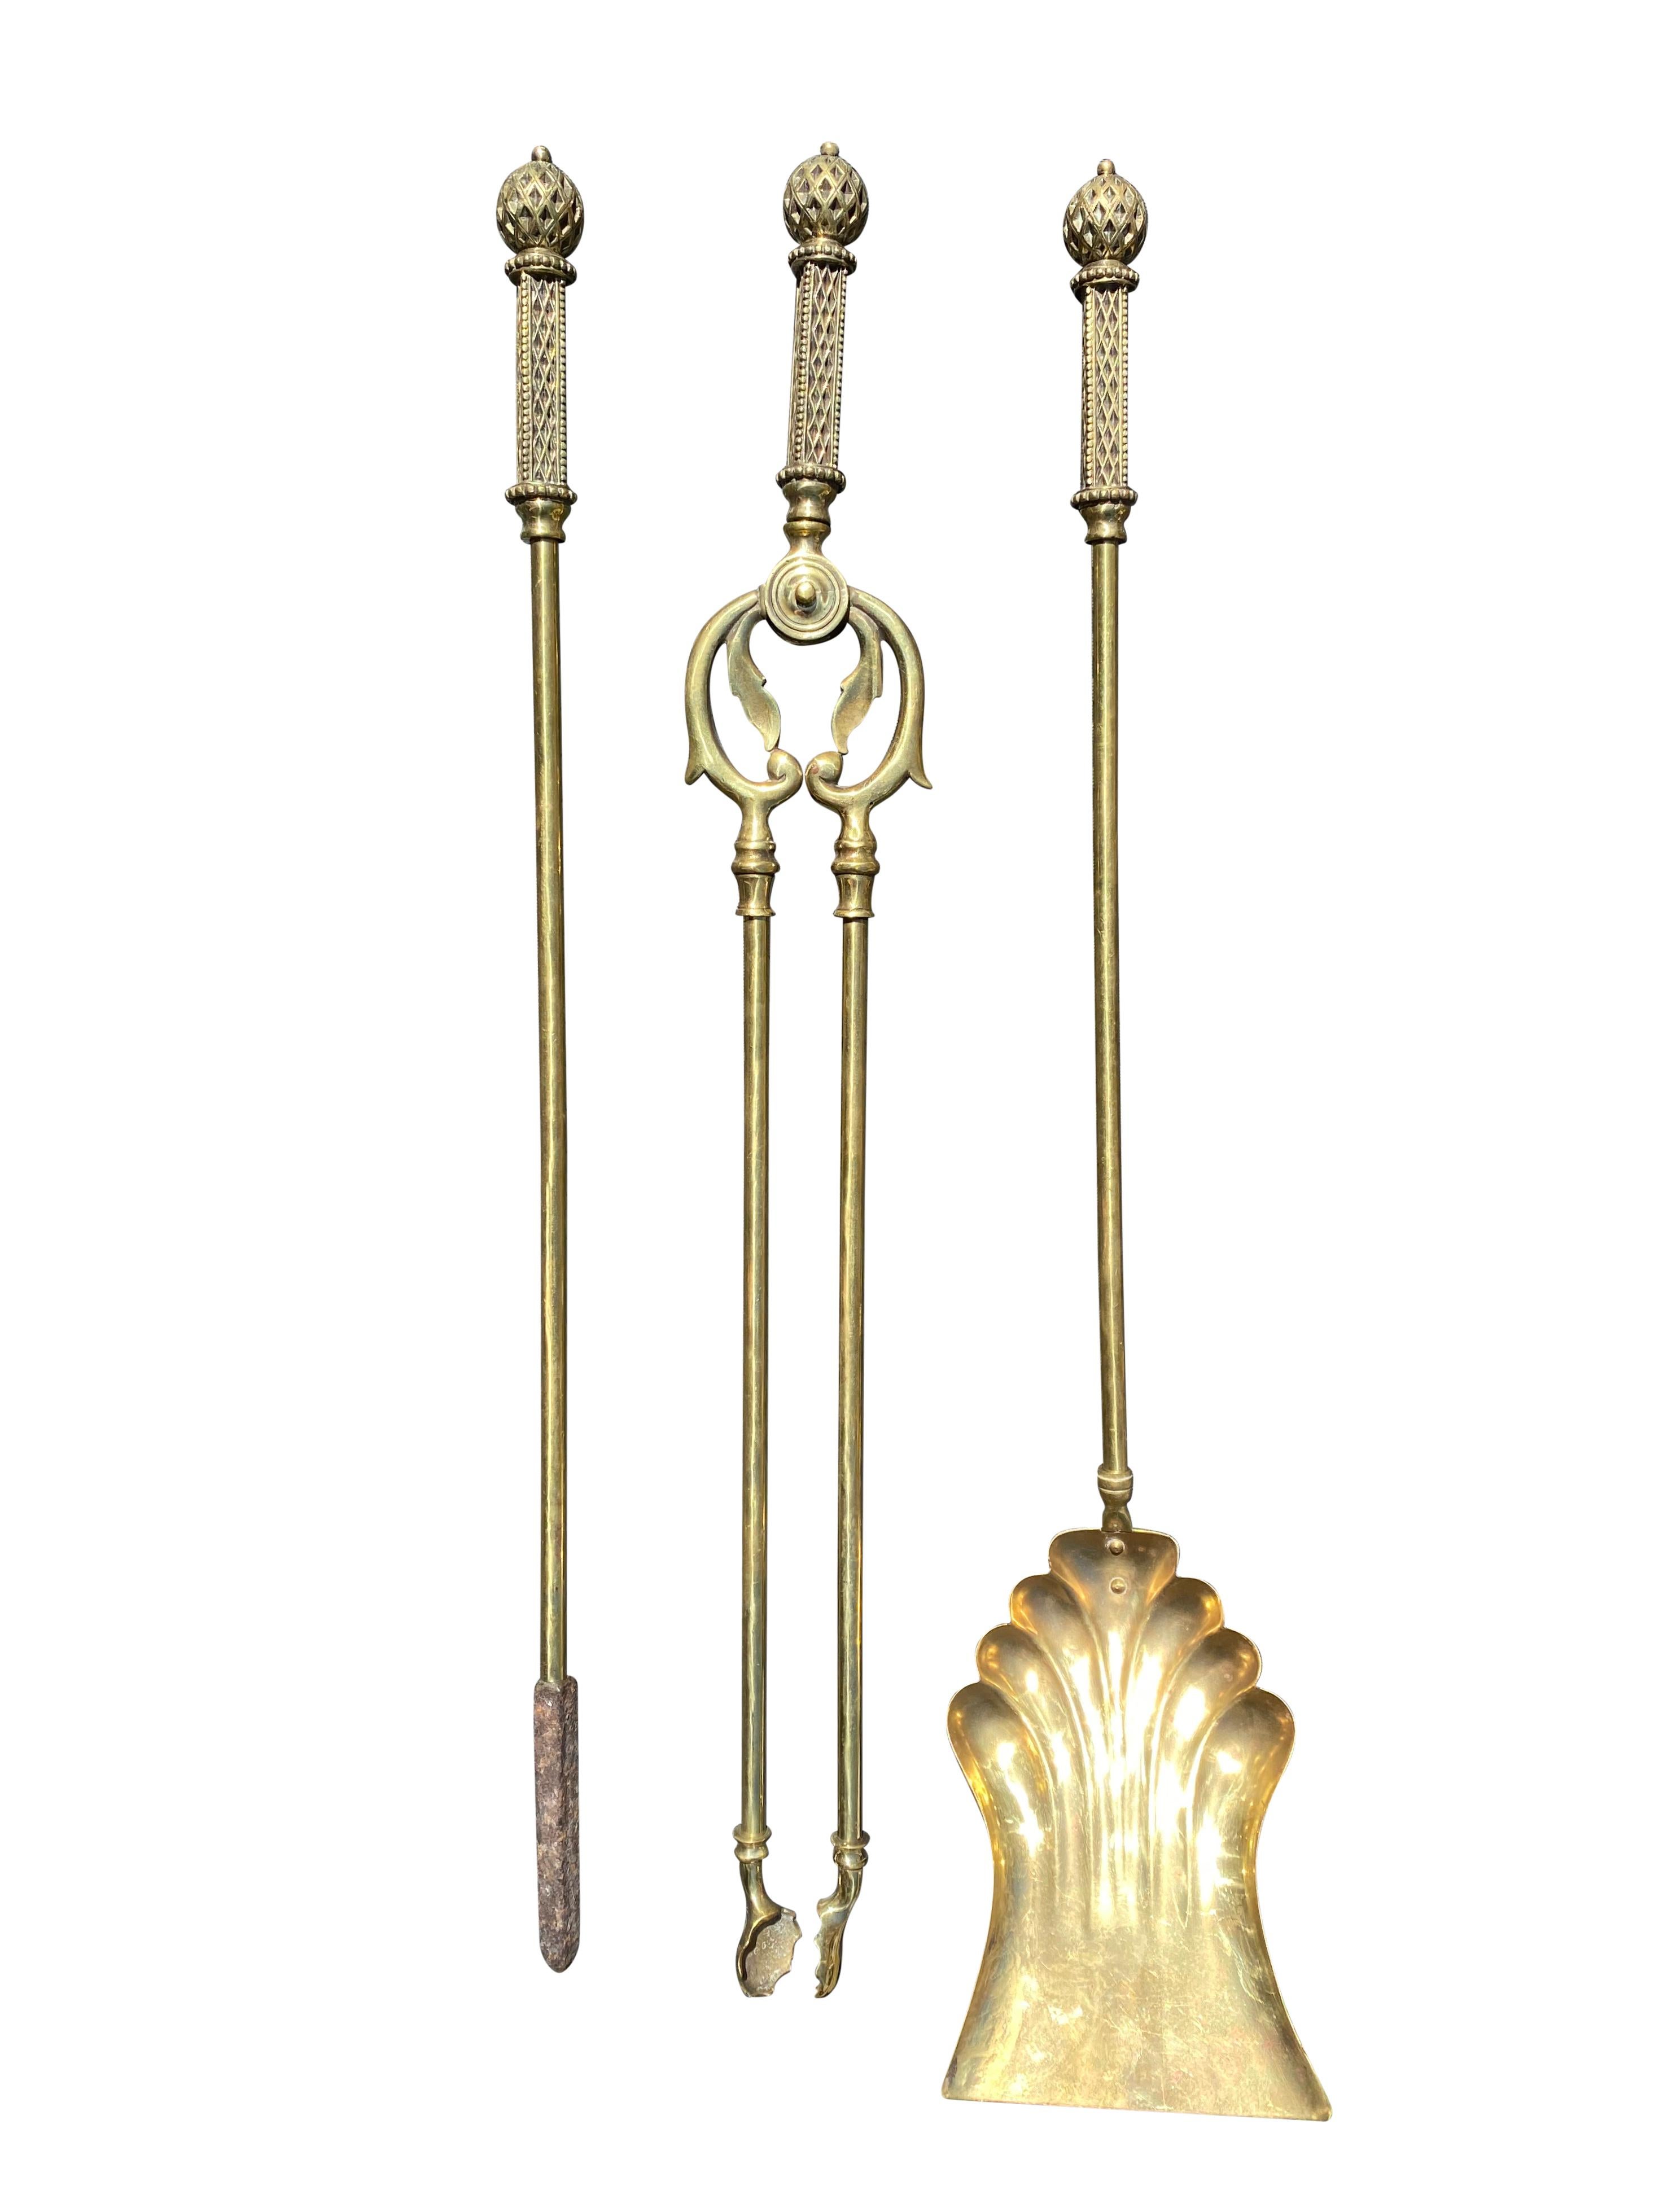 A stunning antique Victorian Gothic brass fire companion set. The superb set is solid brass, with beautifully handcrafted matching motifs. This is truly a remarkable set, with fantastic craftsmanship and rare design. A brilliant example of the